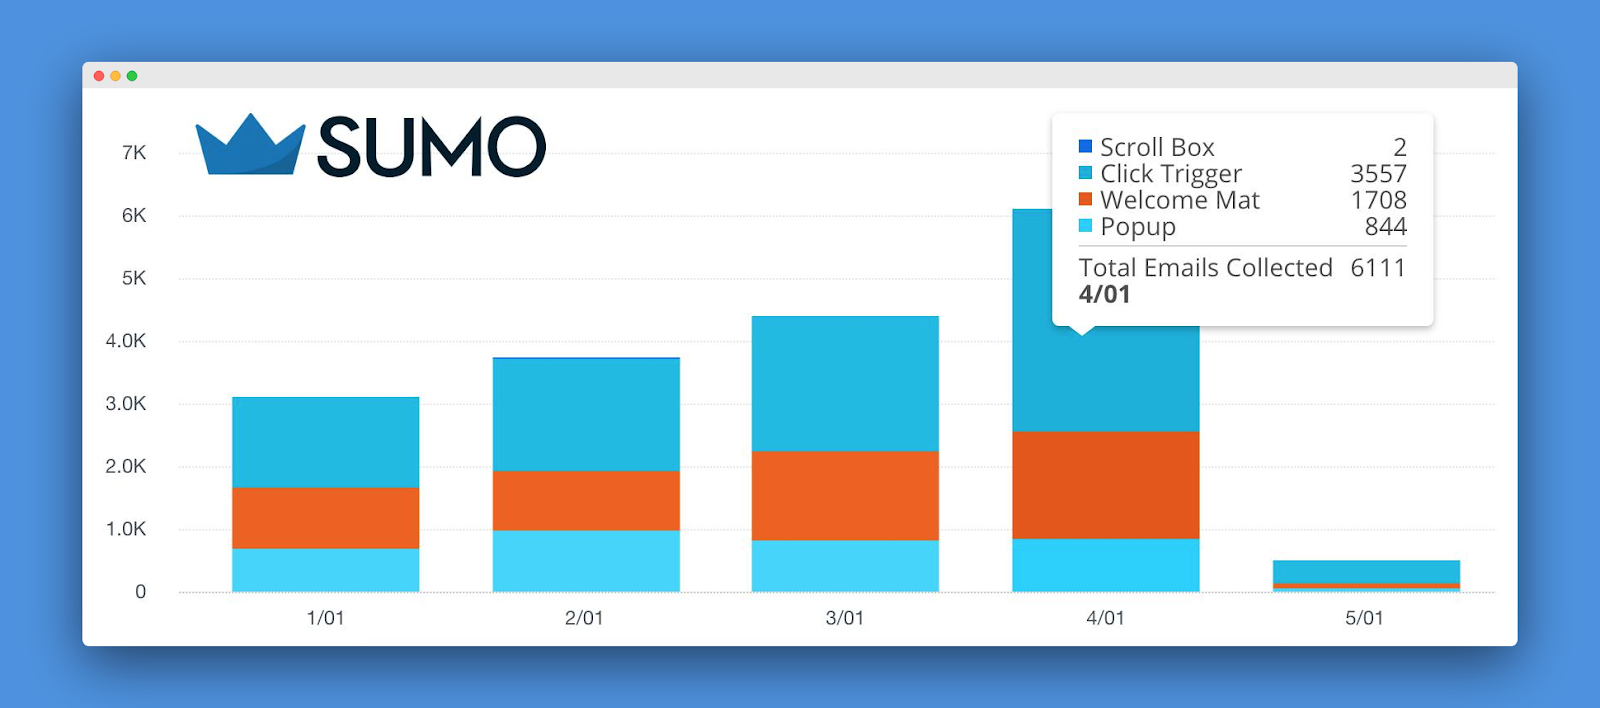 Screenshot of emails collected per month by Sumo